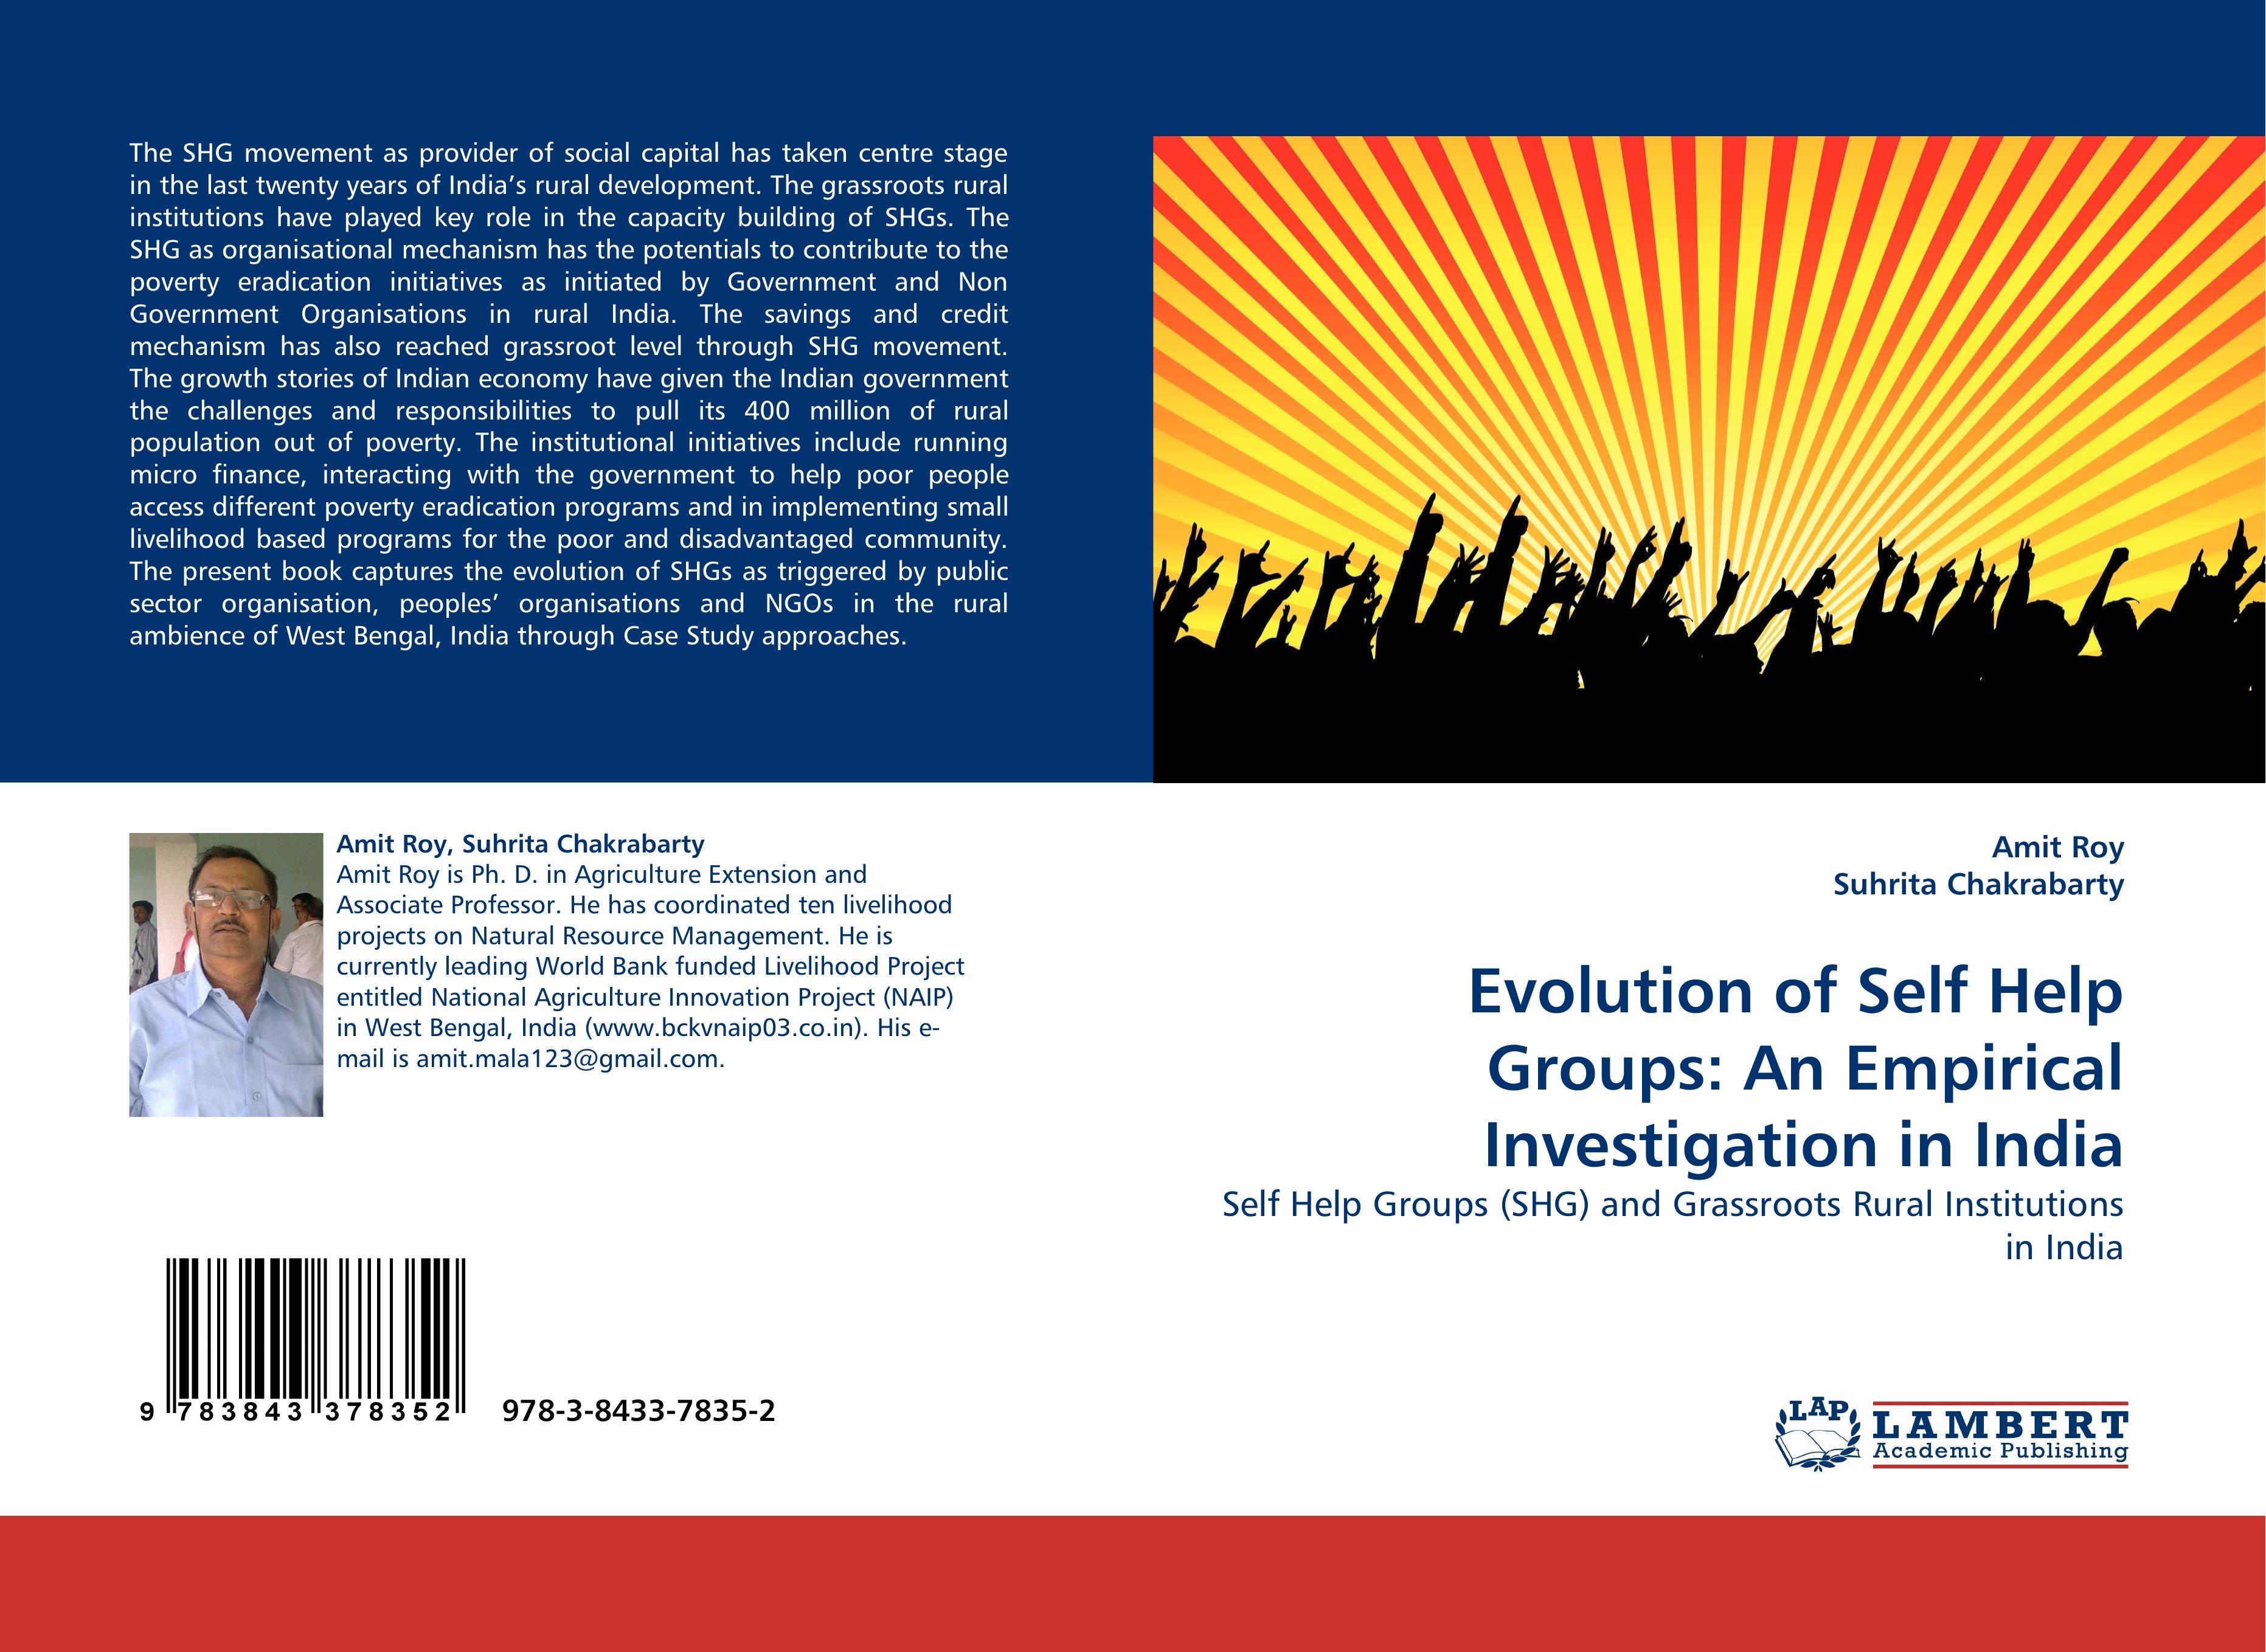 Evolution of Self Help Groups: An Empirical Investigation in India - Amit Roy Suhrita Chakrabarty